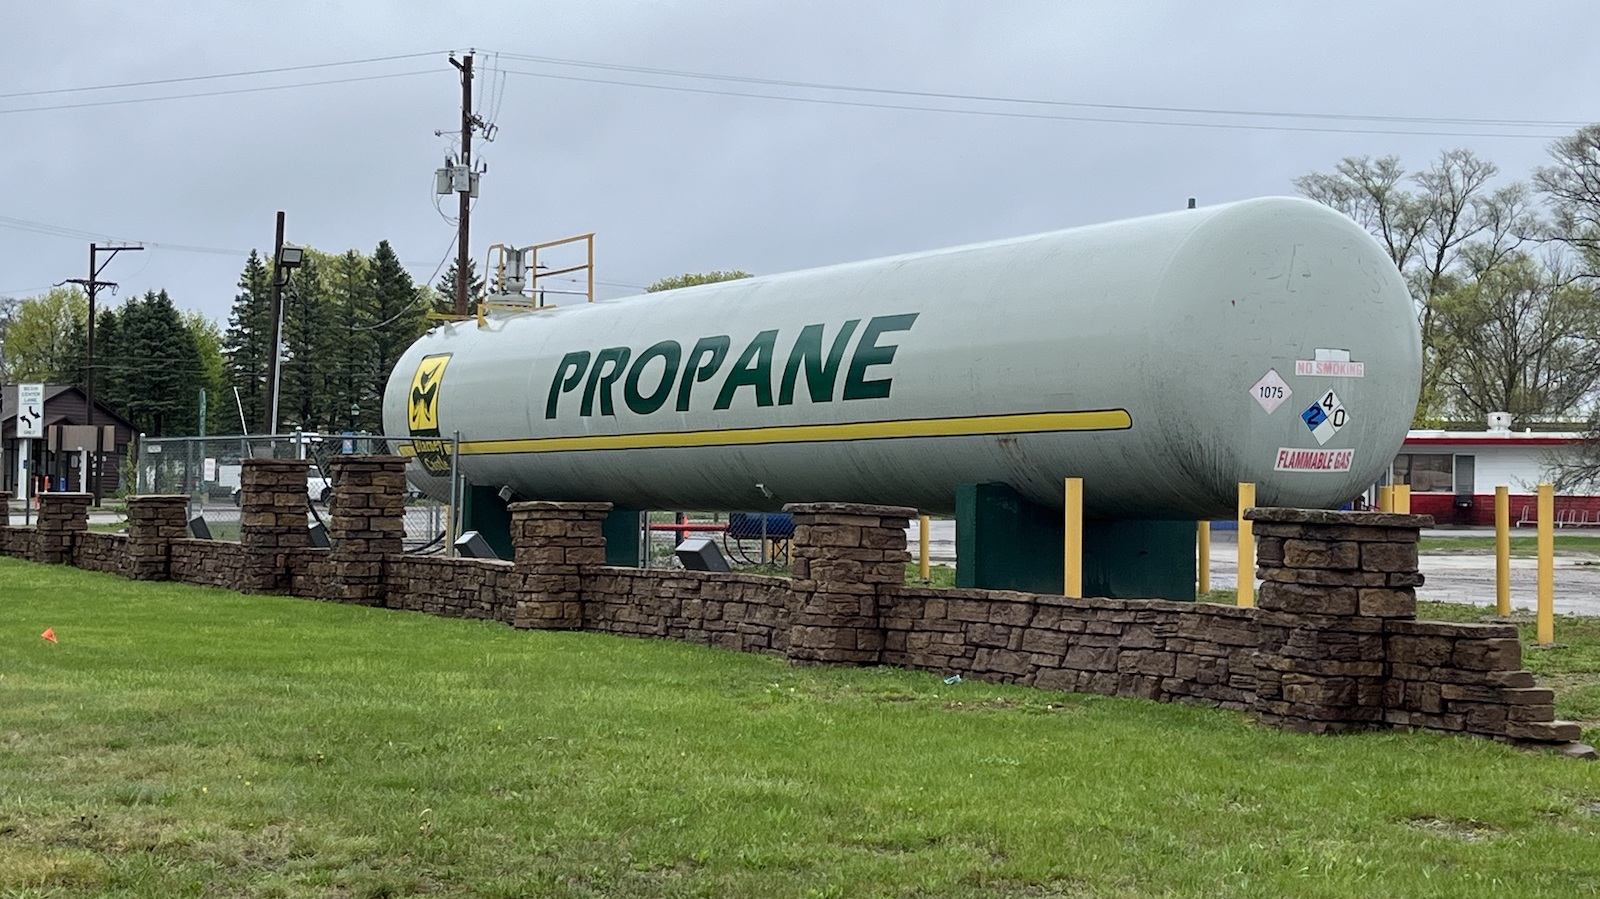 A large tubular tank with Propane painted on it in large letters.